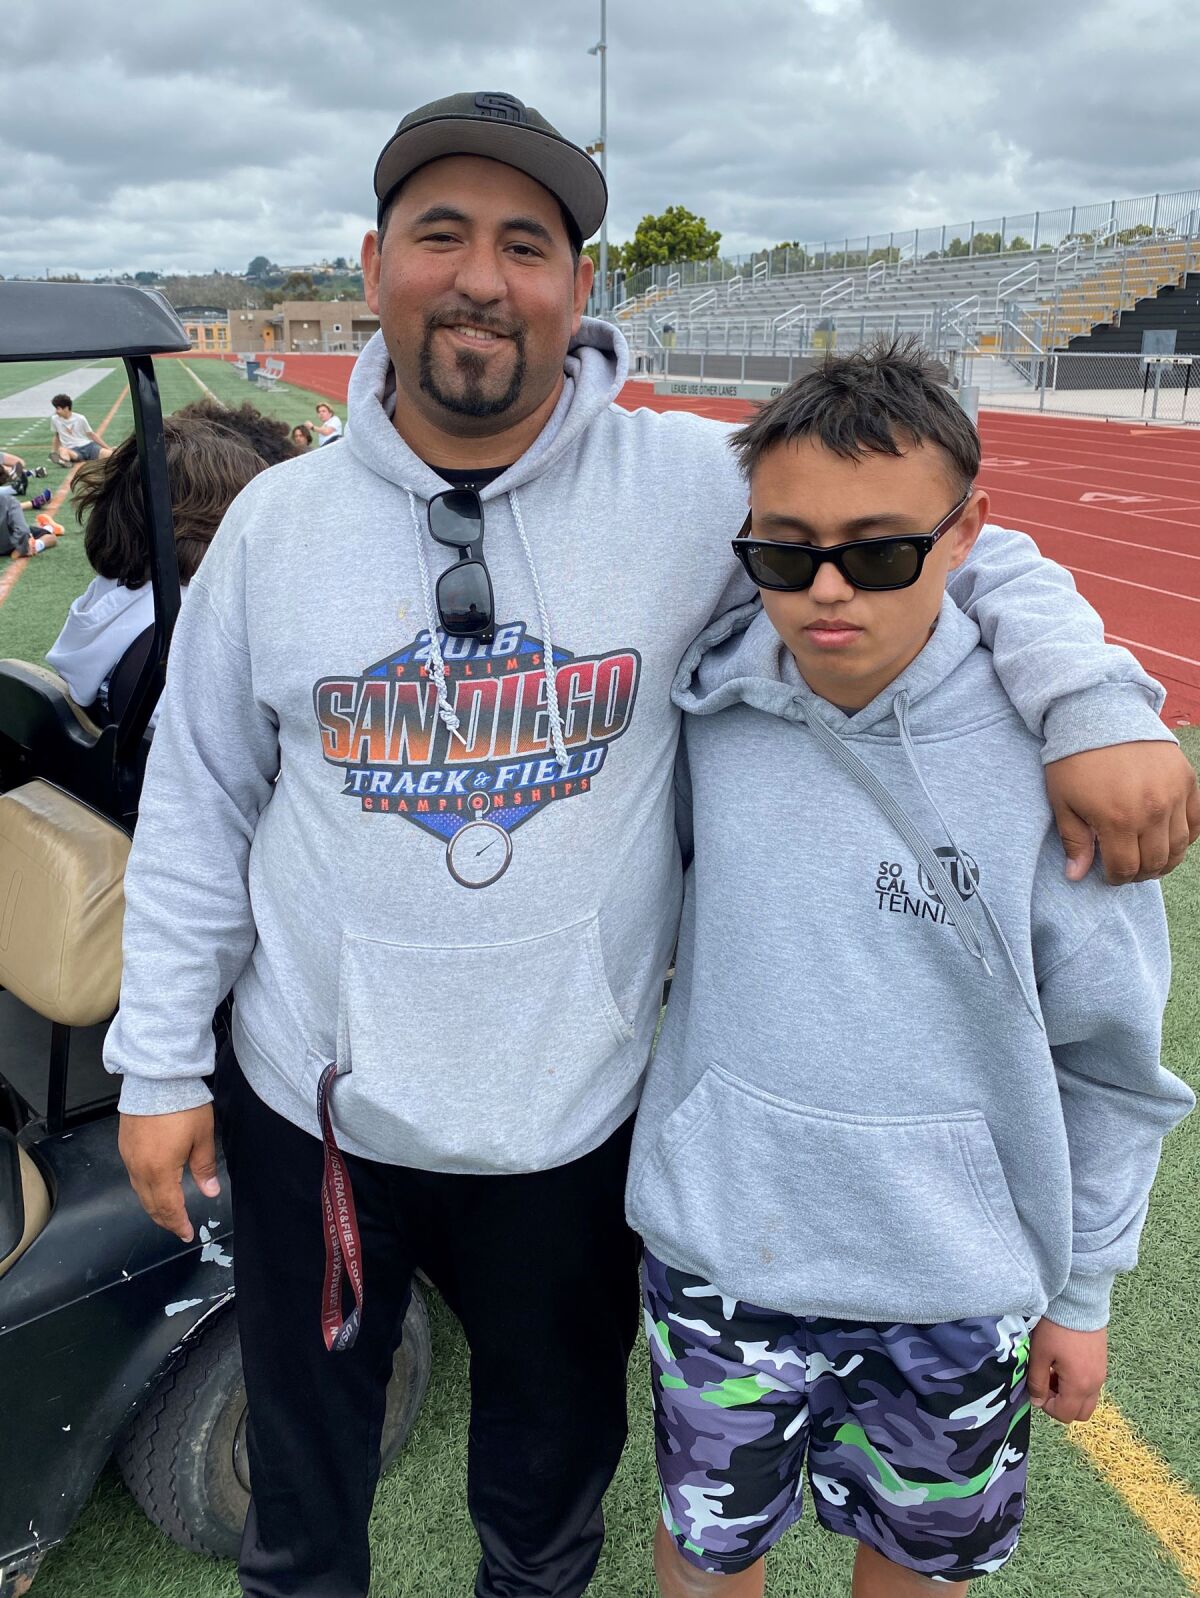 Mission Bay High School Track coach Danny Perez with freshman Chris Adamson who runs the 100-meter and 200-meter races.